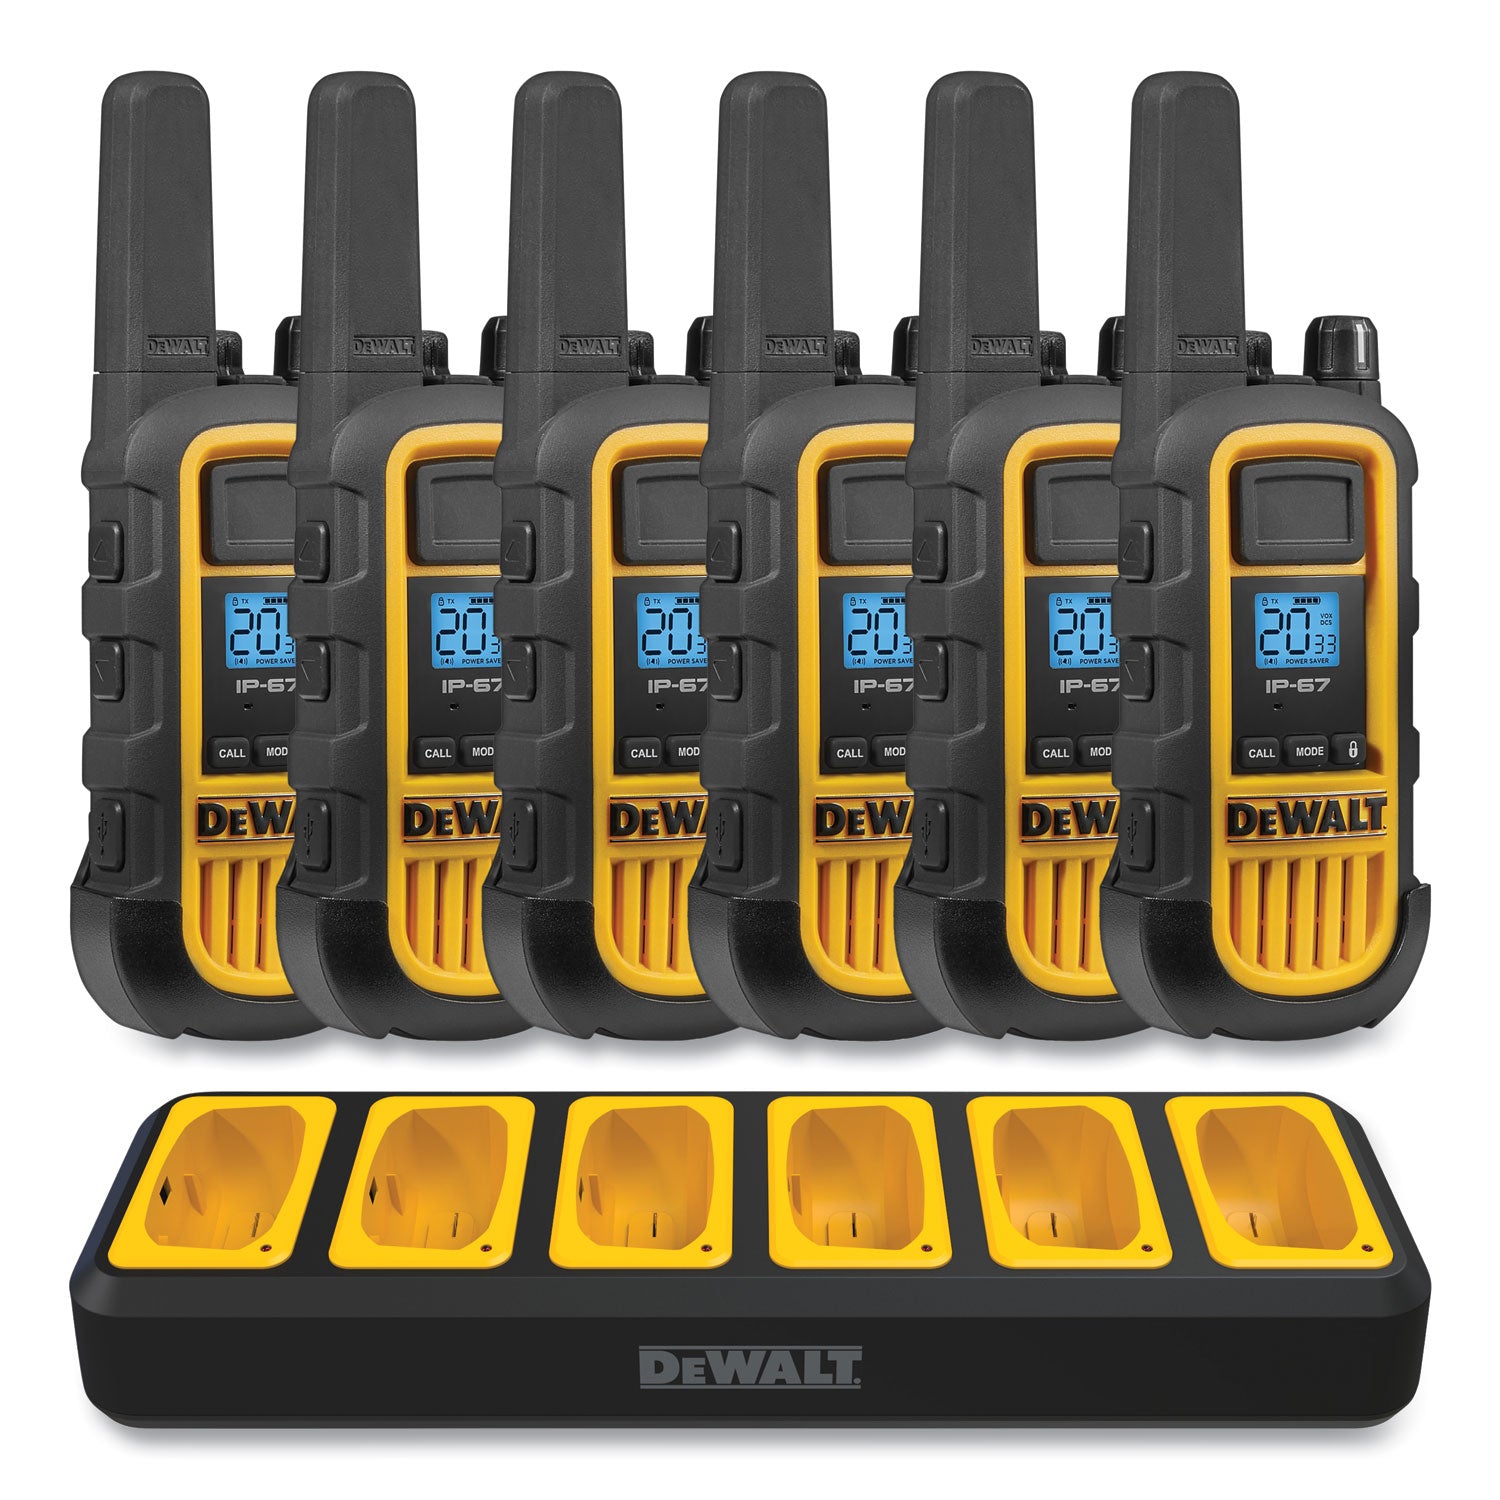 dxfrs800bch-two-way-radios-2-w-22-channels_sehdxfrs800bch - 1